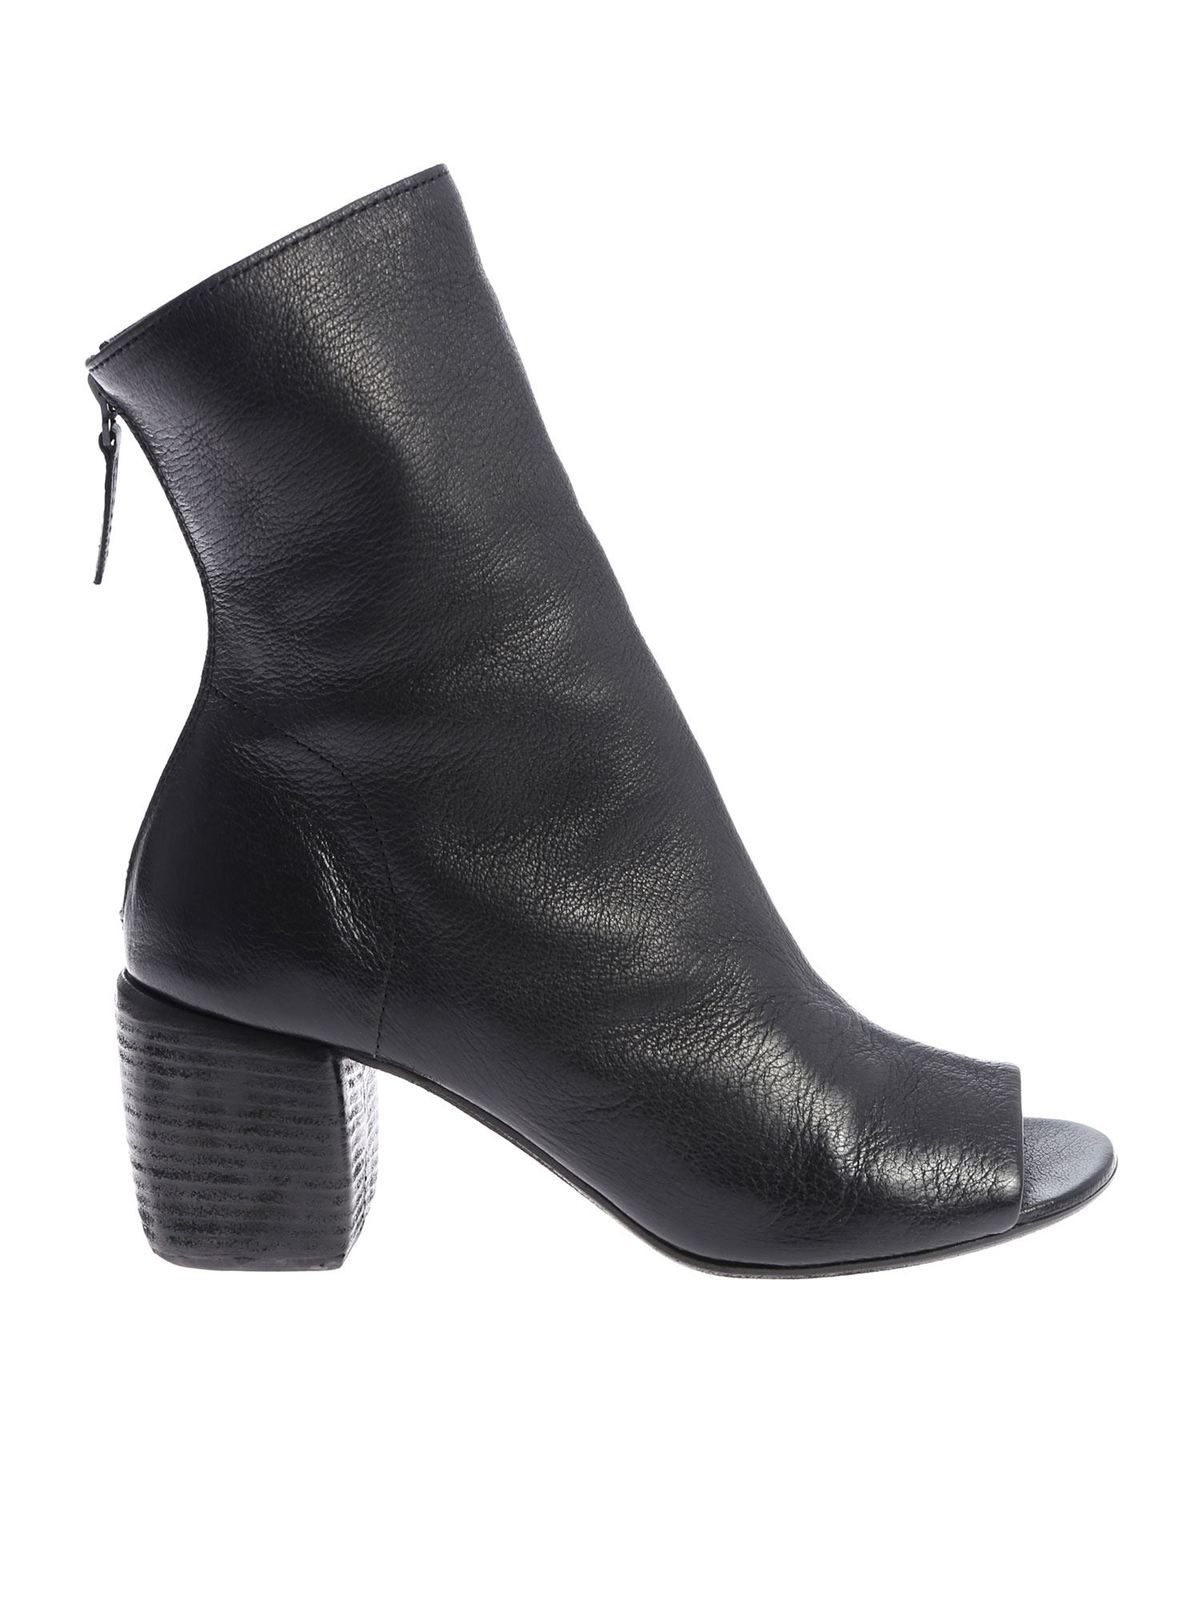 MARSÈLL BLACK MABO SABD OPEN TOE ANKLE BOOTS